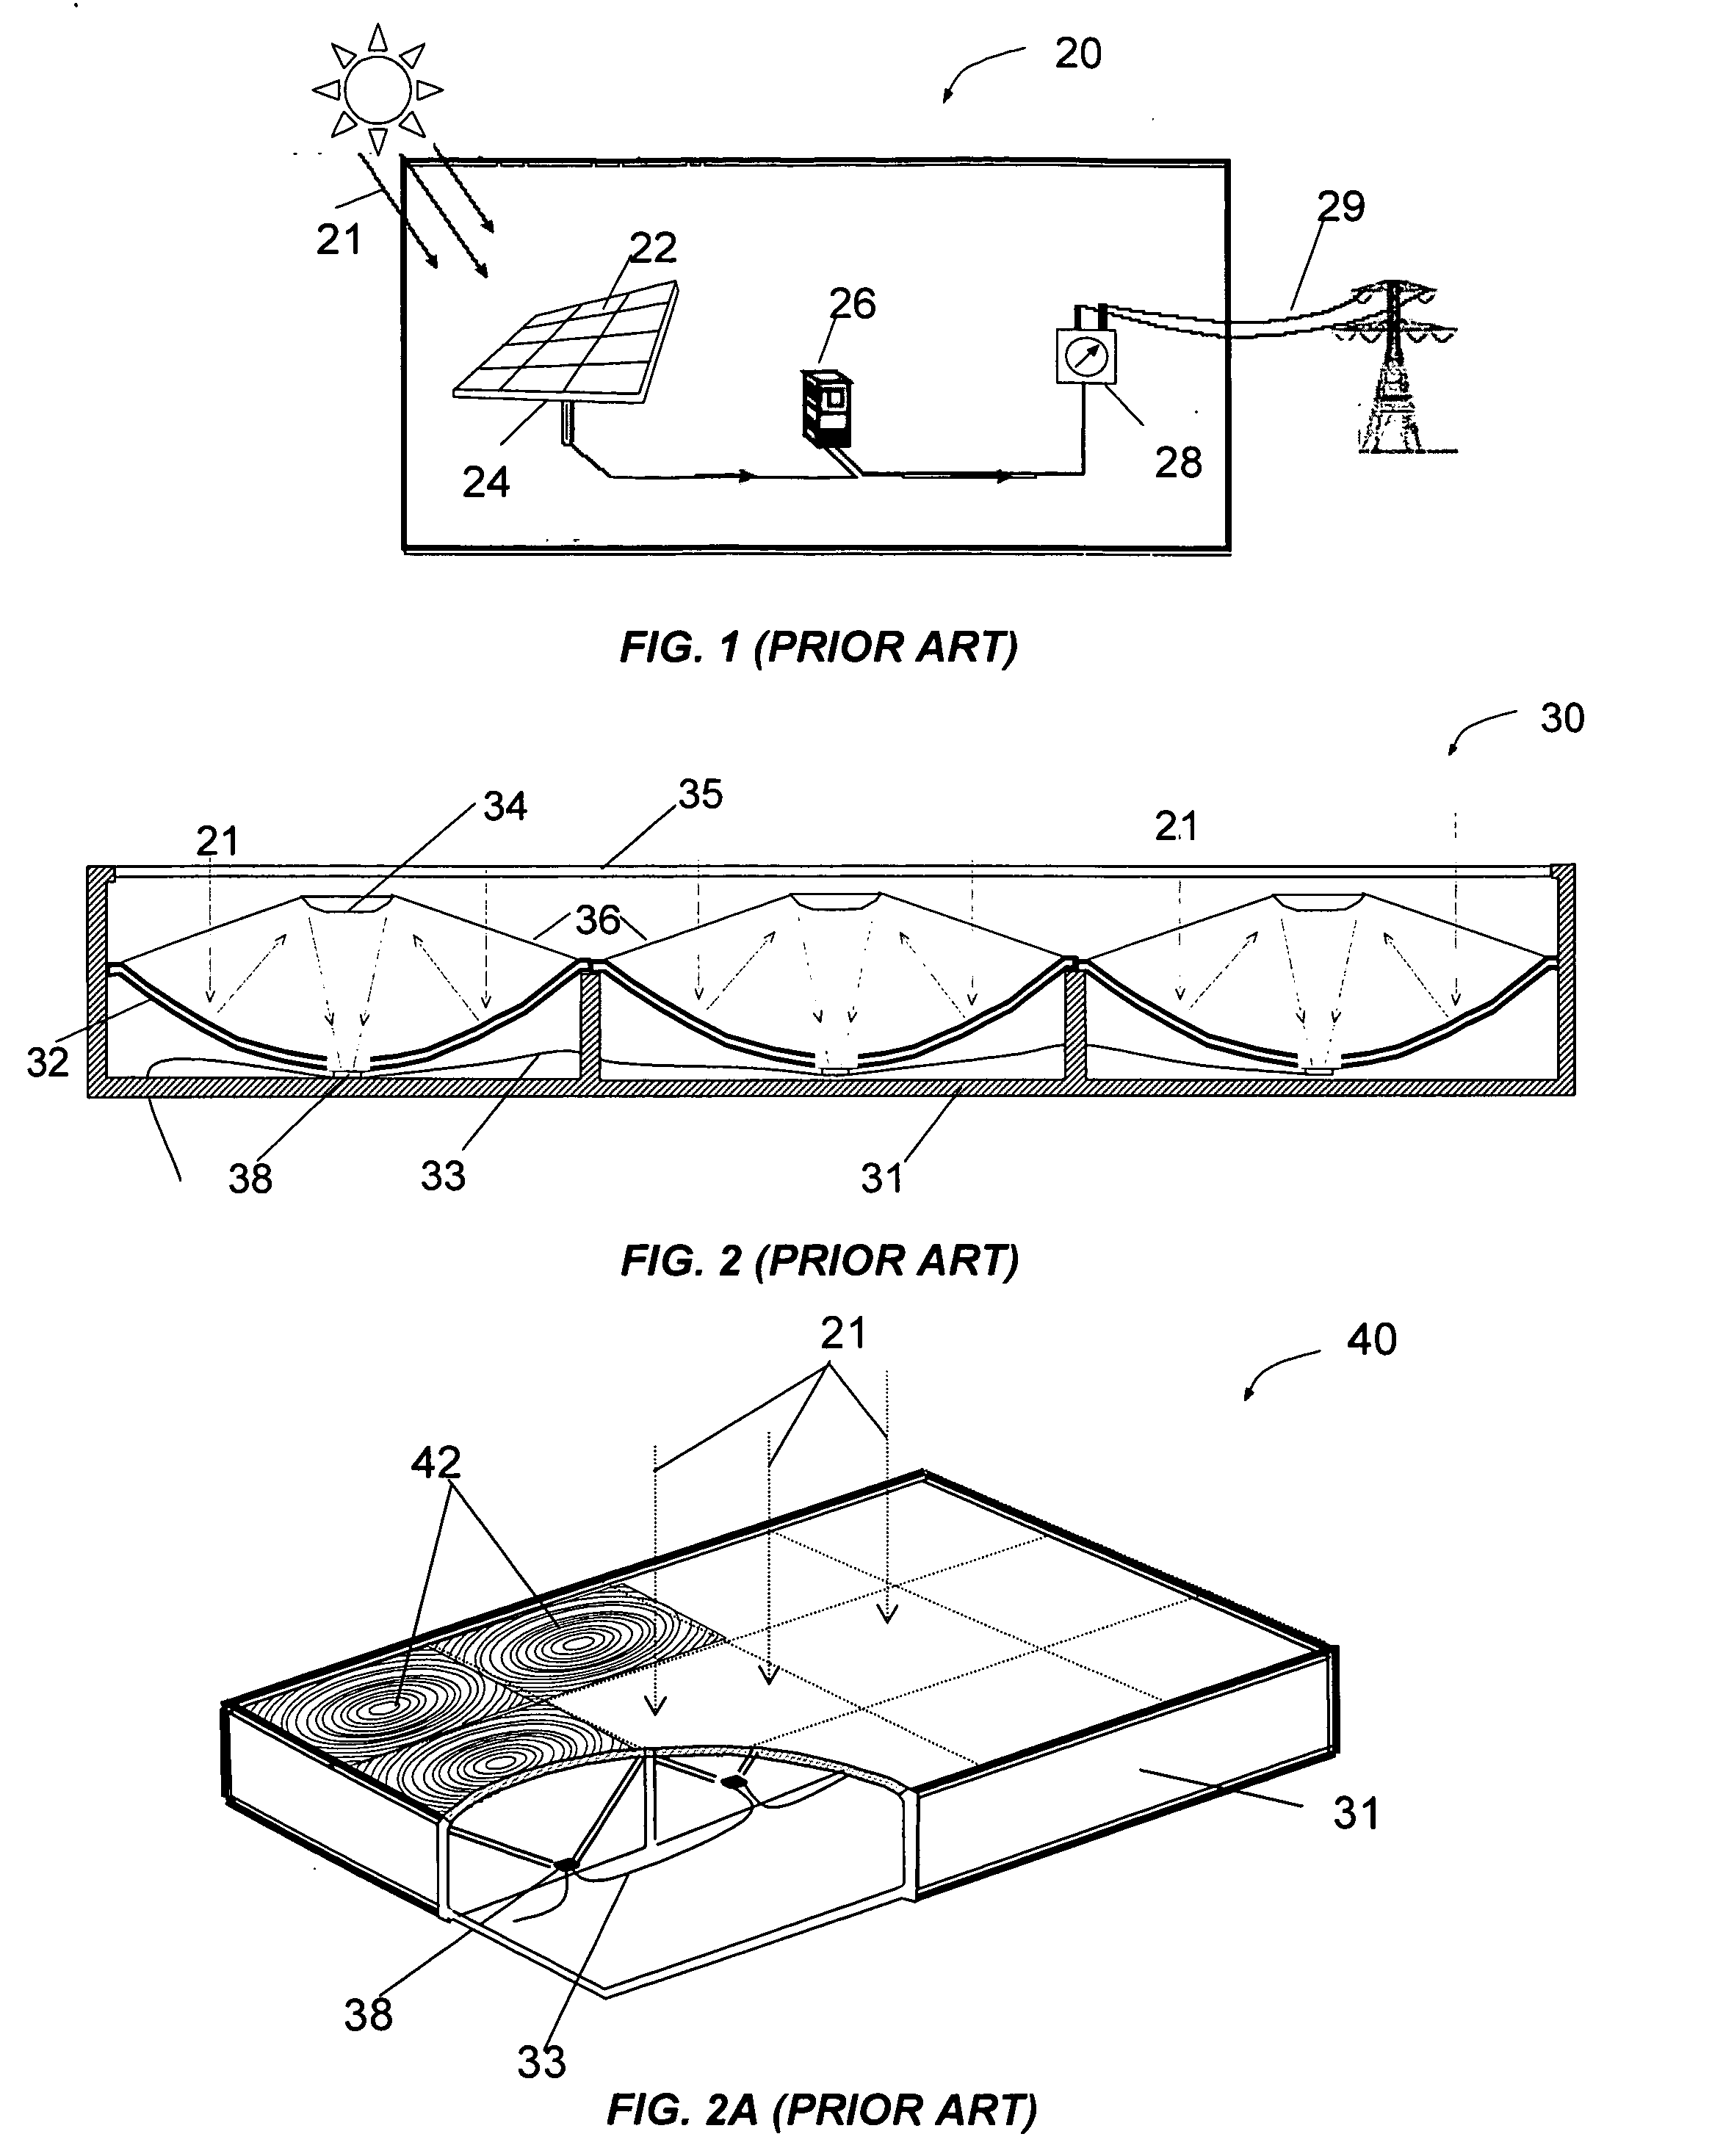 High efficiency concentrating photovoltaic module with reflective optics